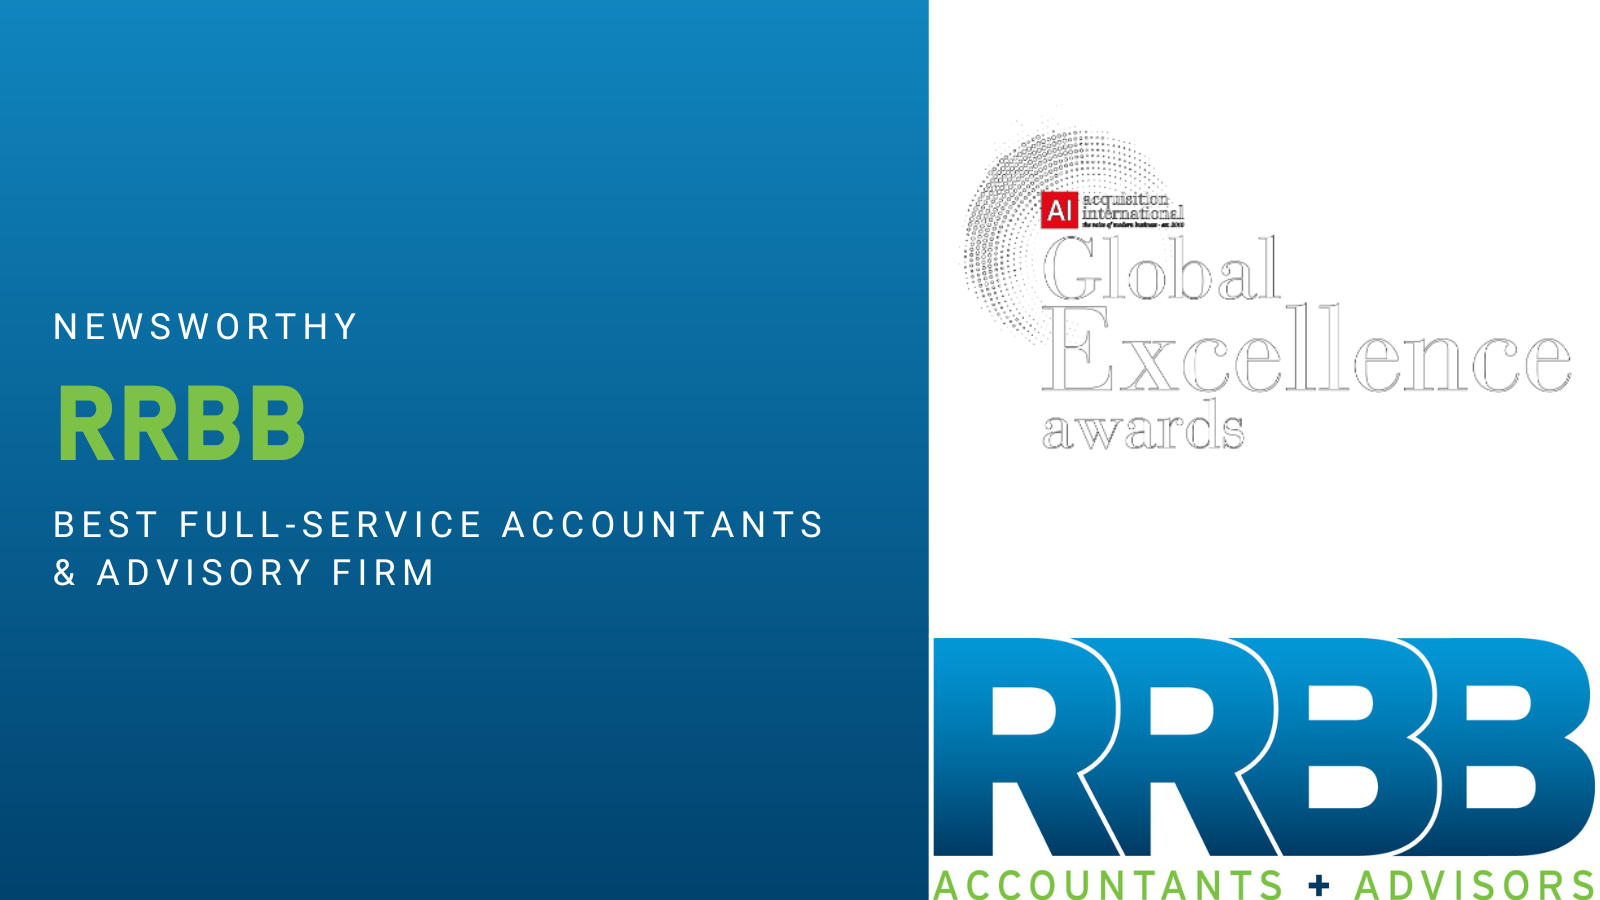 RRBB Named Best Full-Service Accountants & Advisory Firm by Acquisition International Image